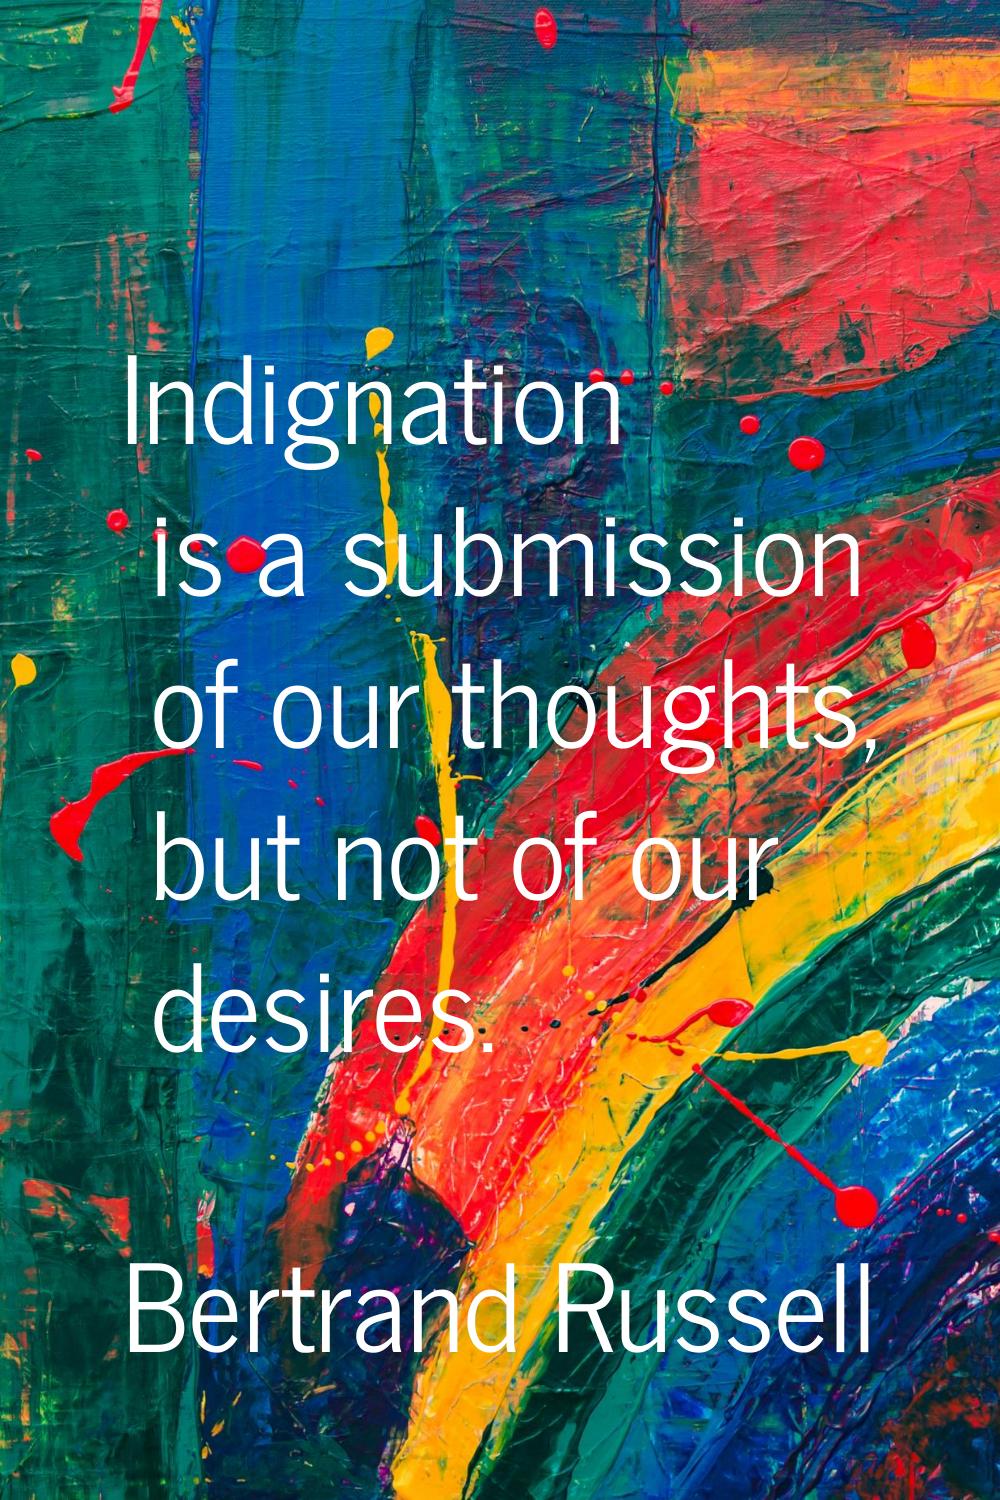 Indignation is a submission of our thoughts, but not of our desires.